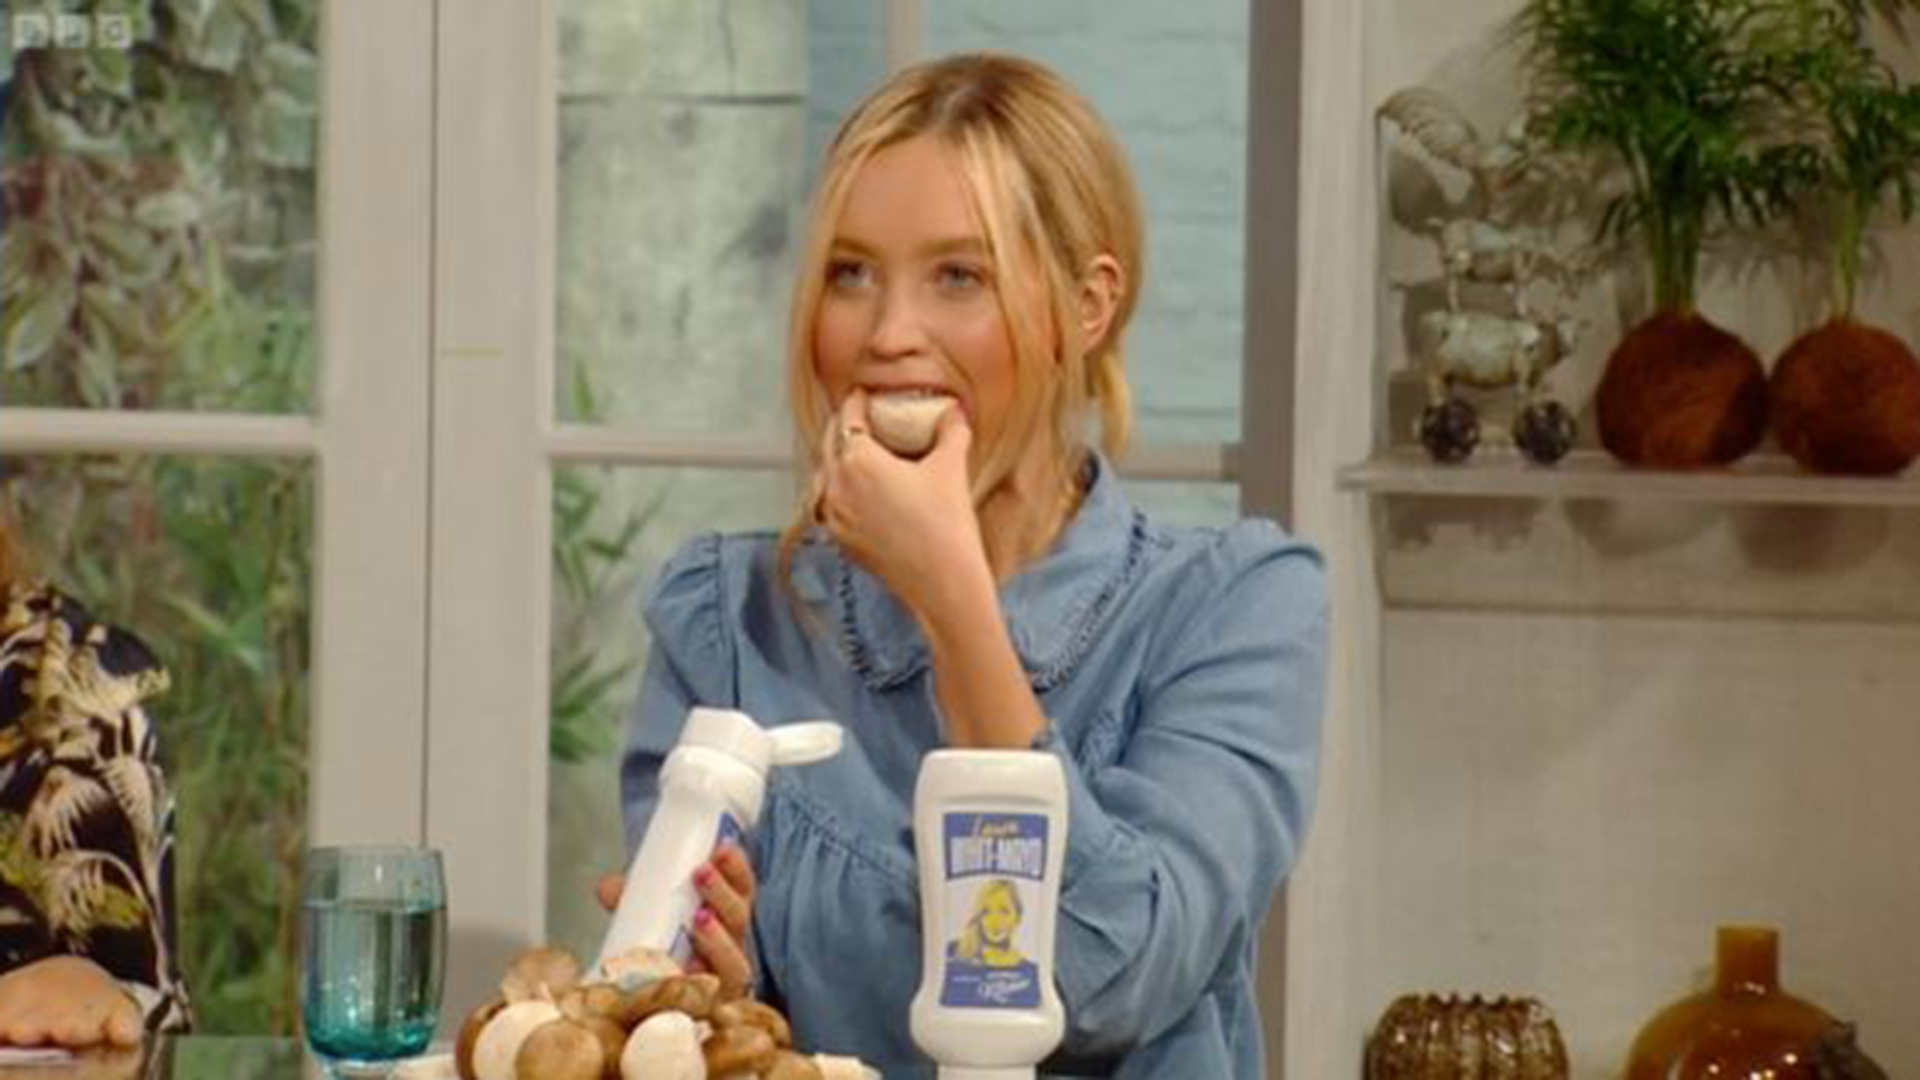 Love Island’s Laura Whitmore surprises Saturday Kitchen viewers with her ‘horrorous’ food combination